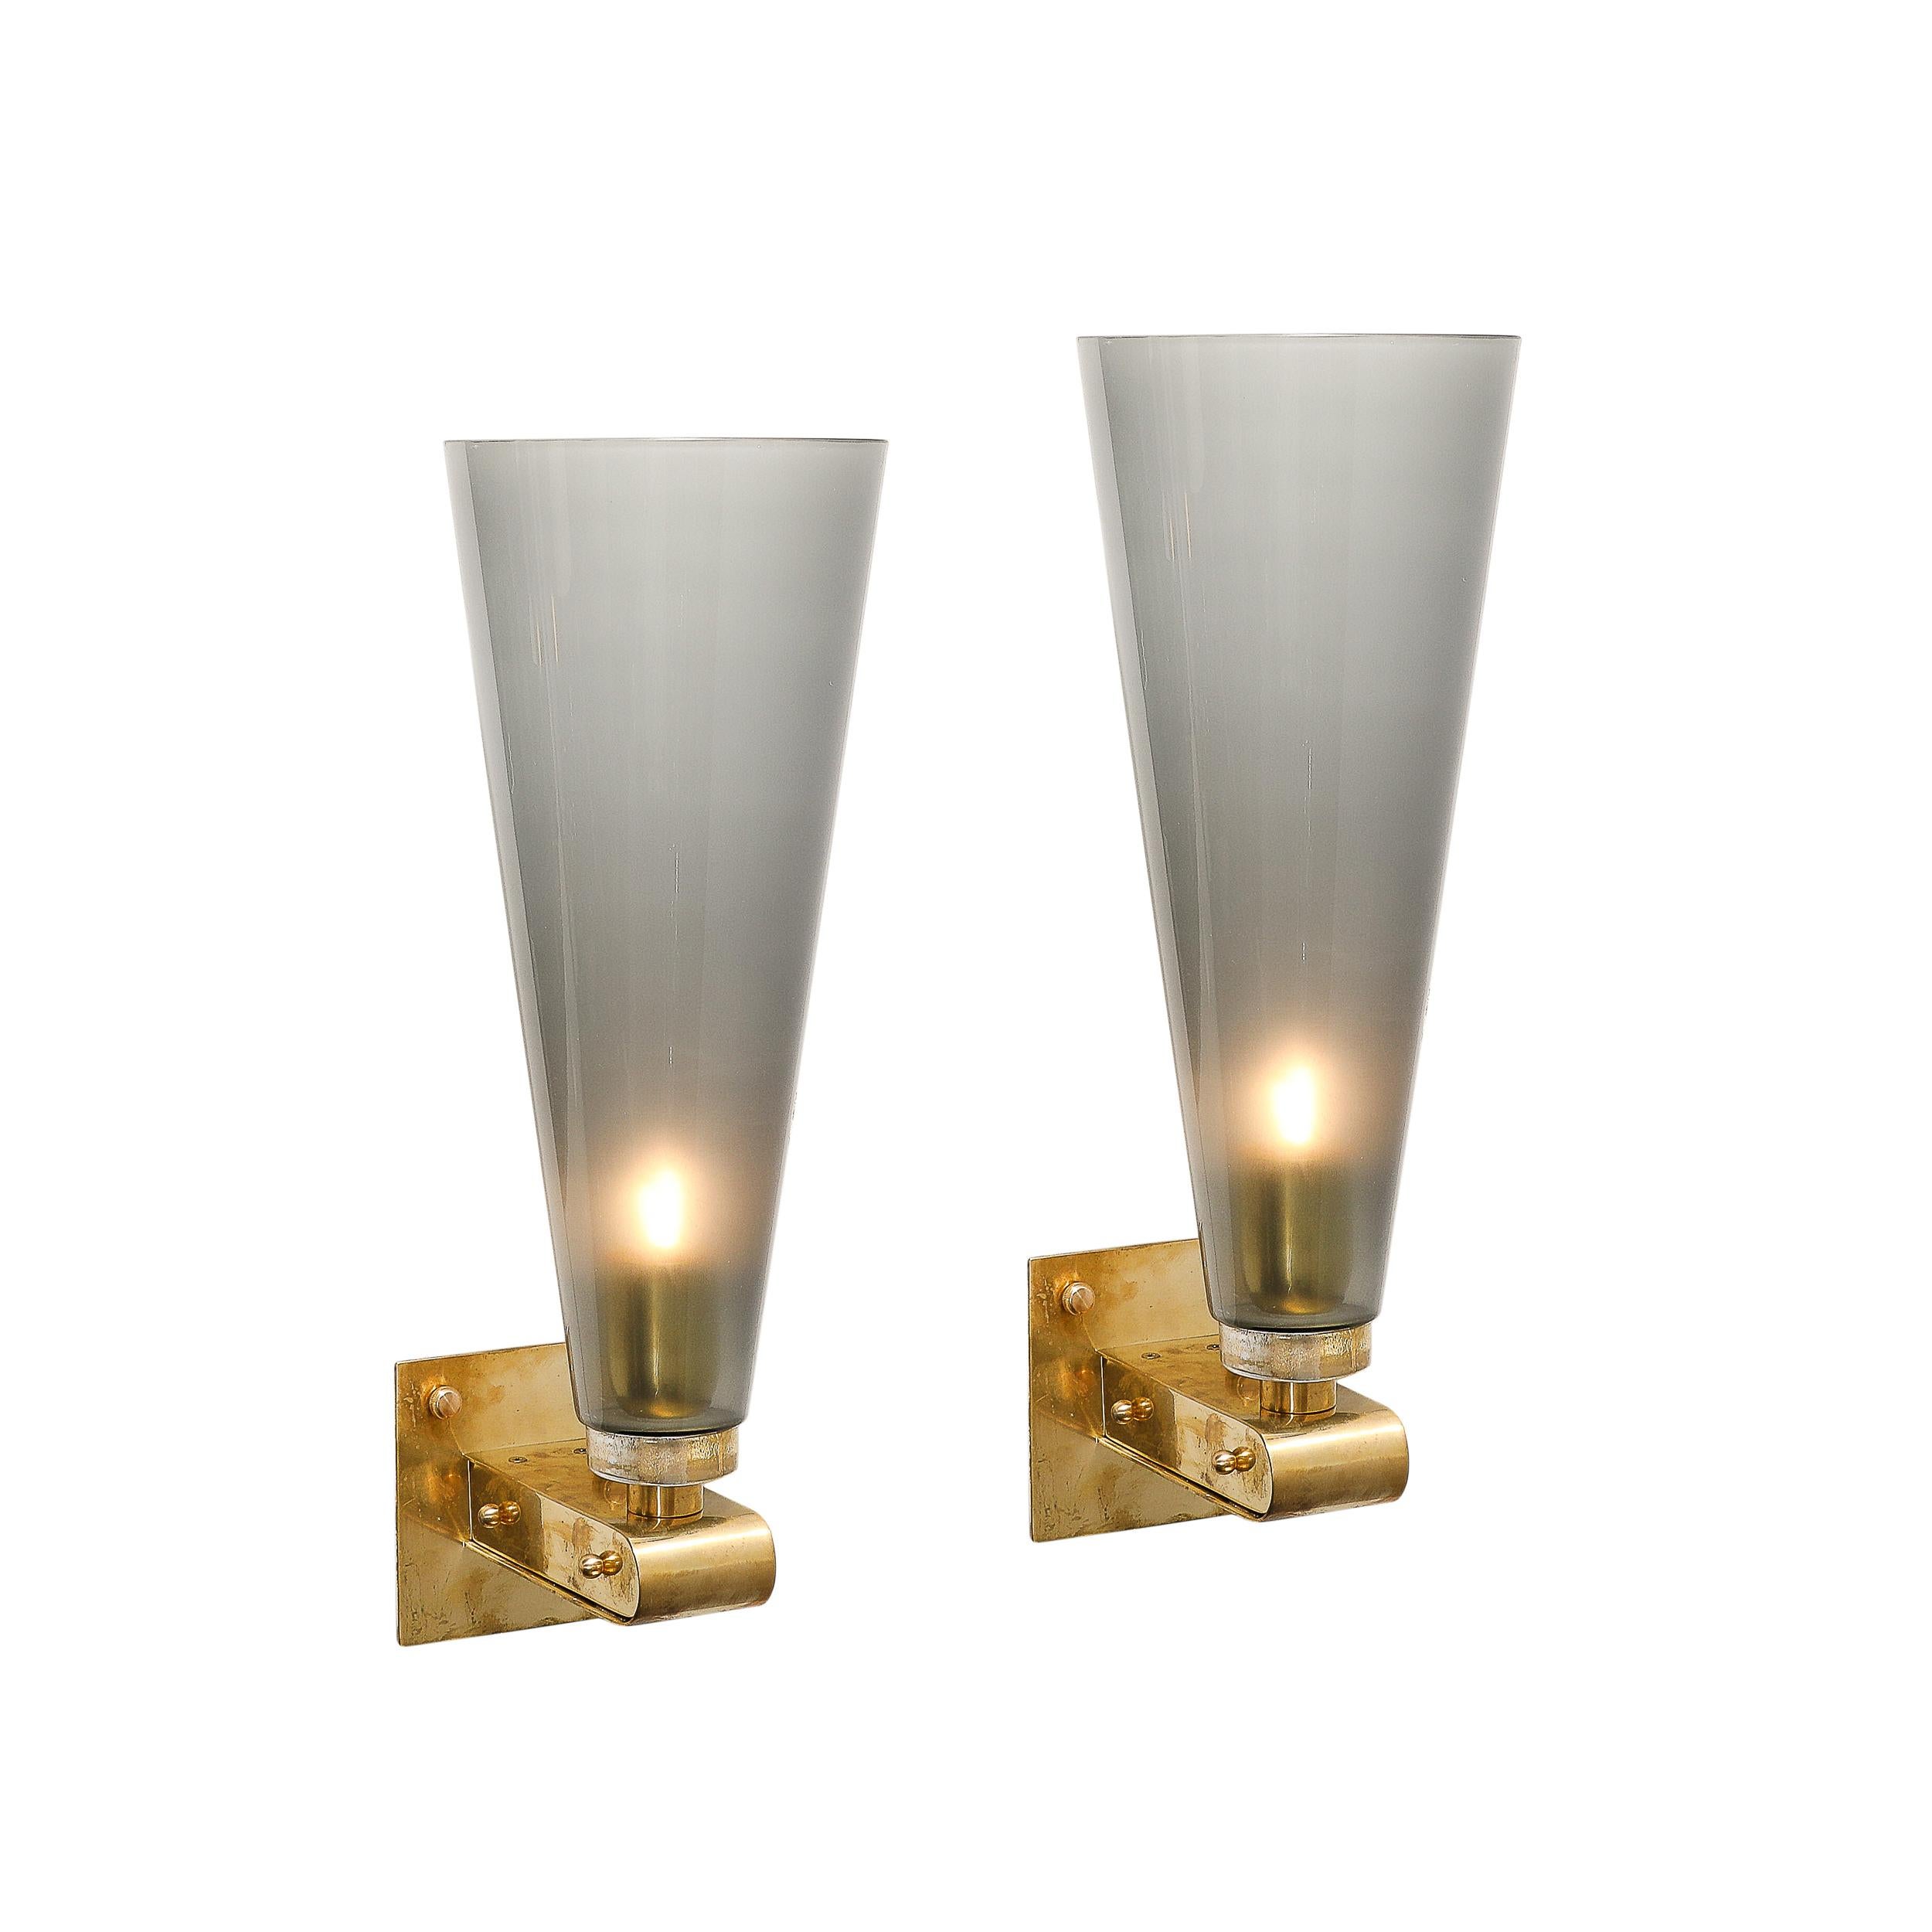 These beautifully composed and materially distinct Modernist Conical Hand-Blown Murano Glass Sconces in Smoked Graphite W/Brass Fittings originate from Italy during the 21st Century. Featuring vertically oriented conical shade formed in Hand-Blown